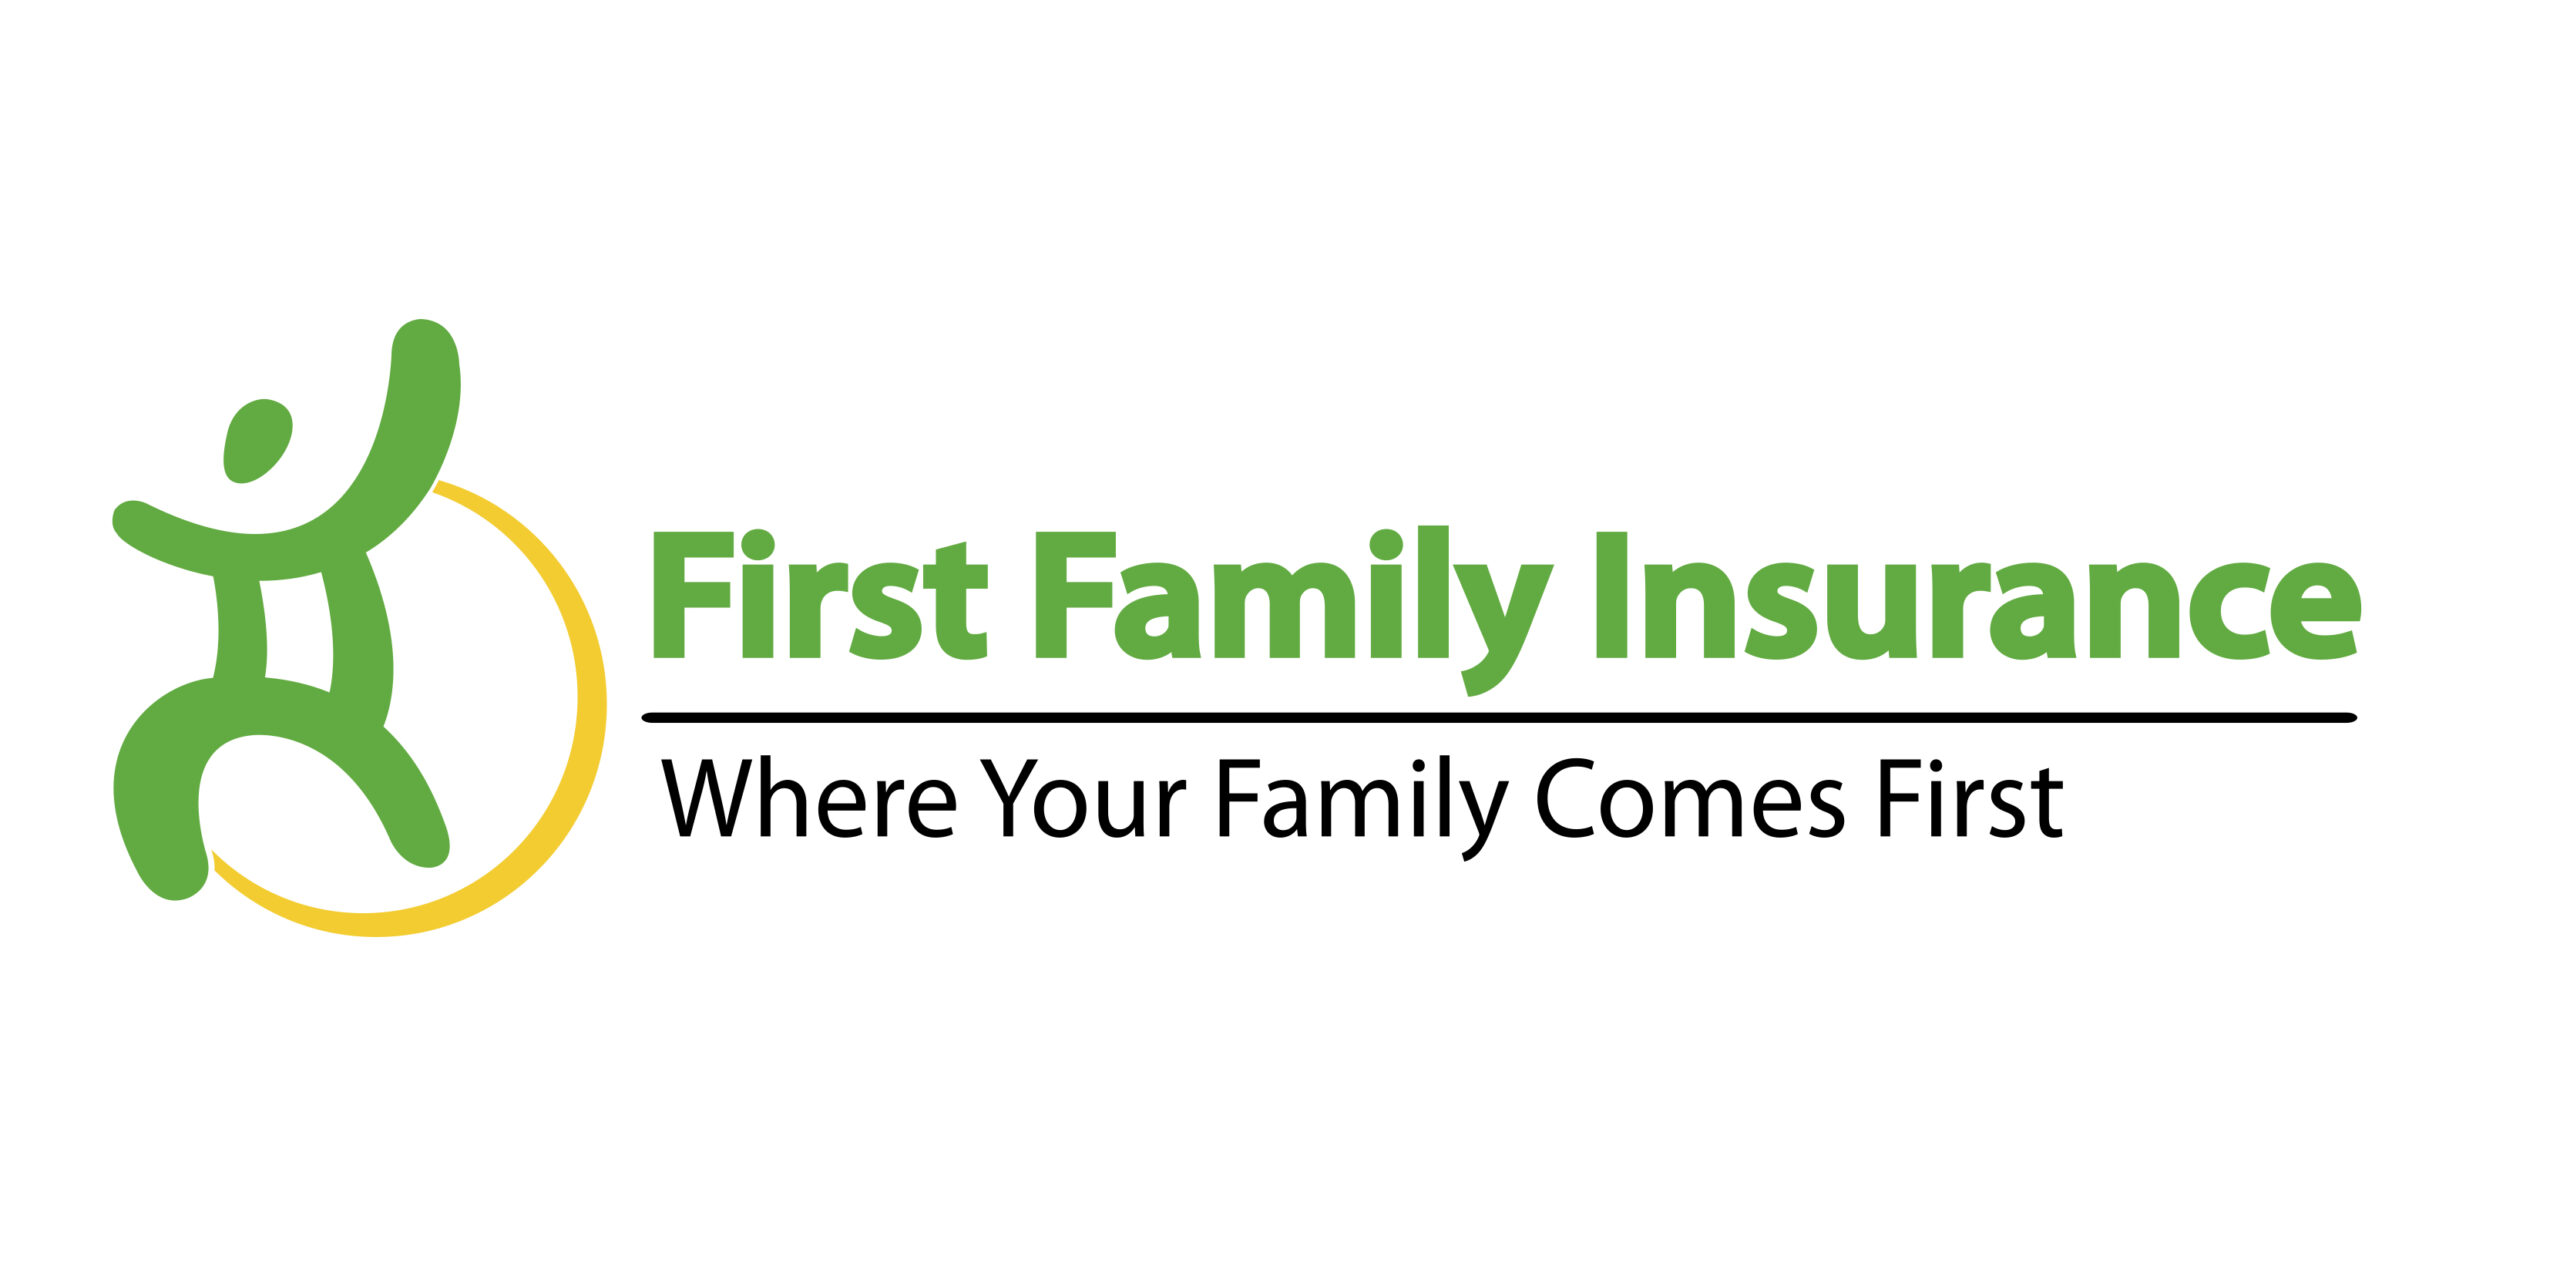 Coral Springs F.L. Insurance Brokerage receiving over 200+ leads monthly, CPL of $26 and over a 80% contact rate!